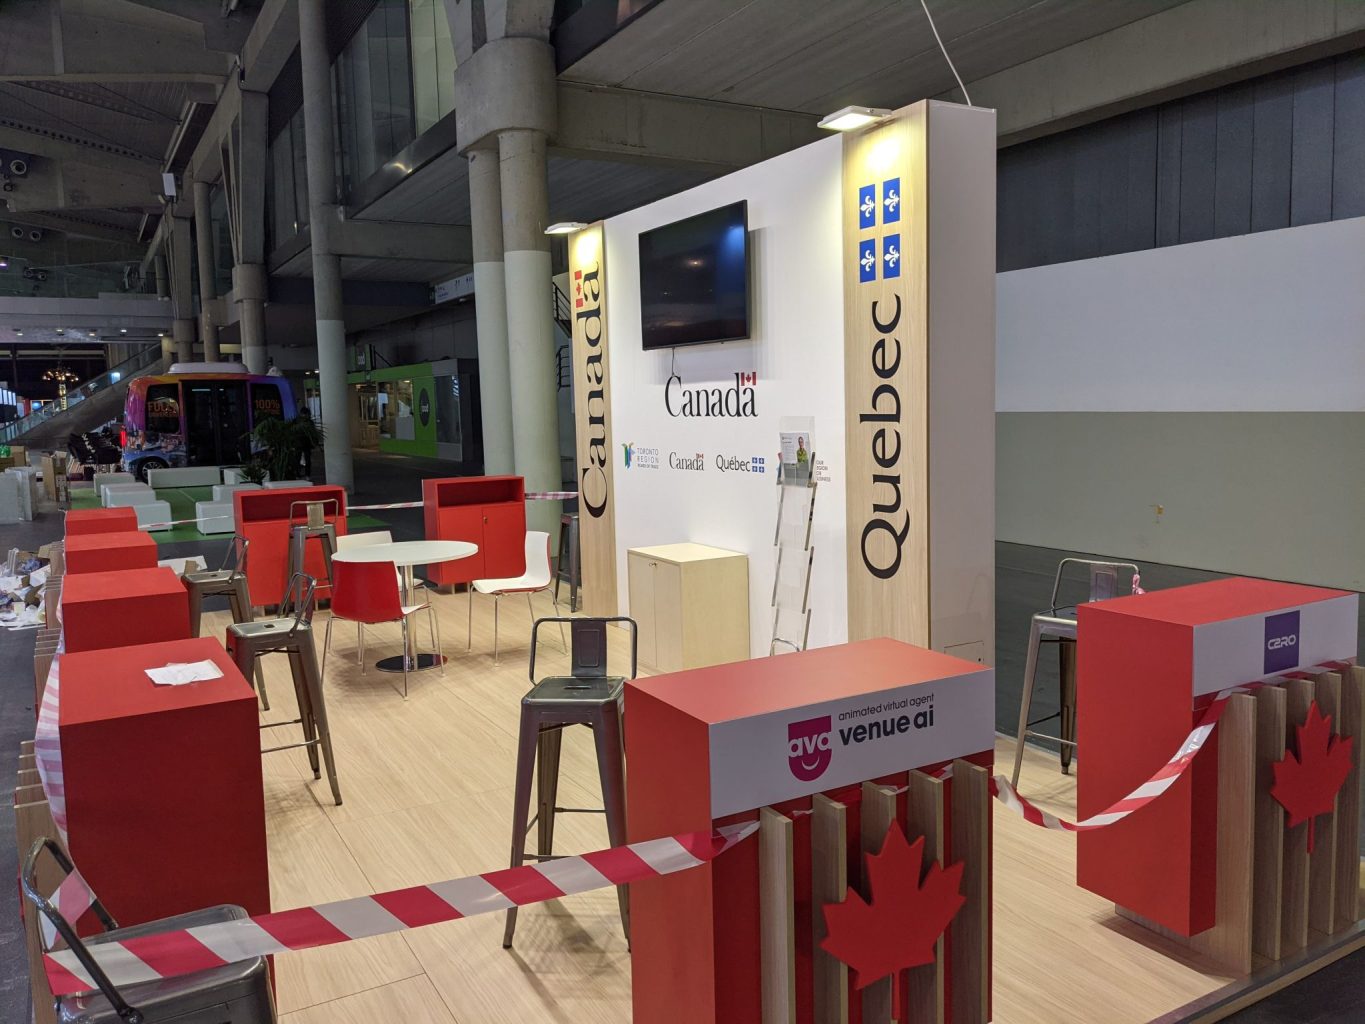 The Canada pavilion featuring new "AVA Venue AI" branding at the 2021 Smart City Expo. 